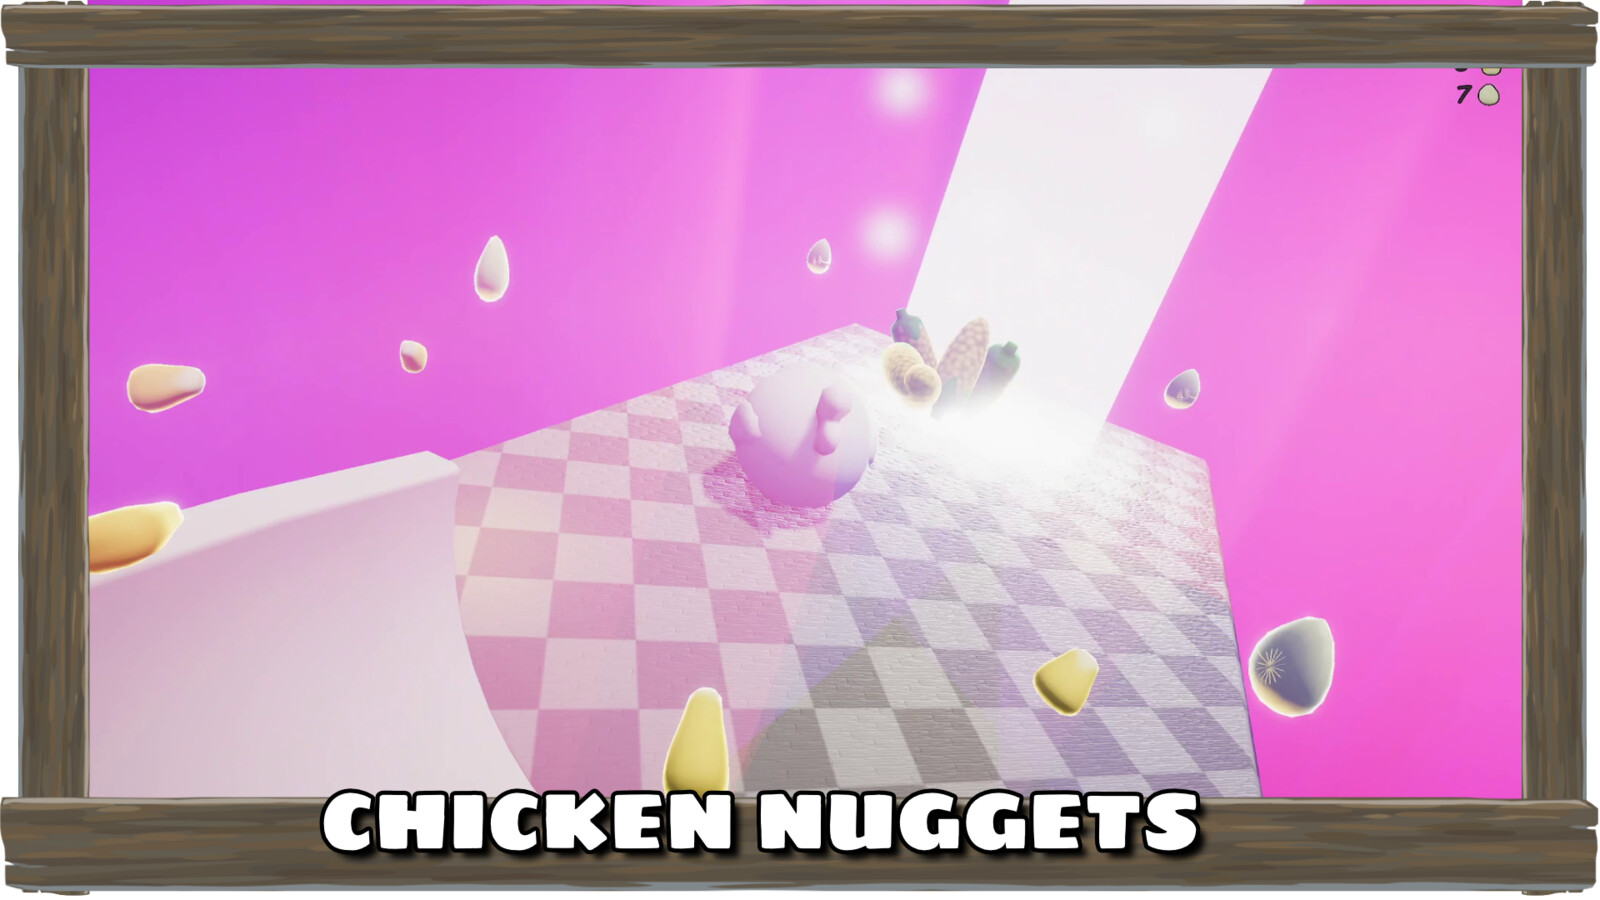 A late game Chicken Nuggets level